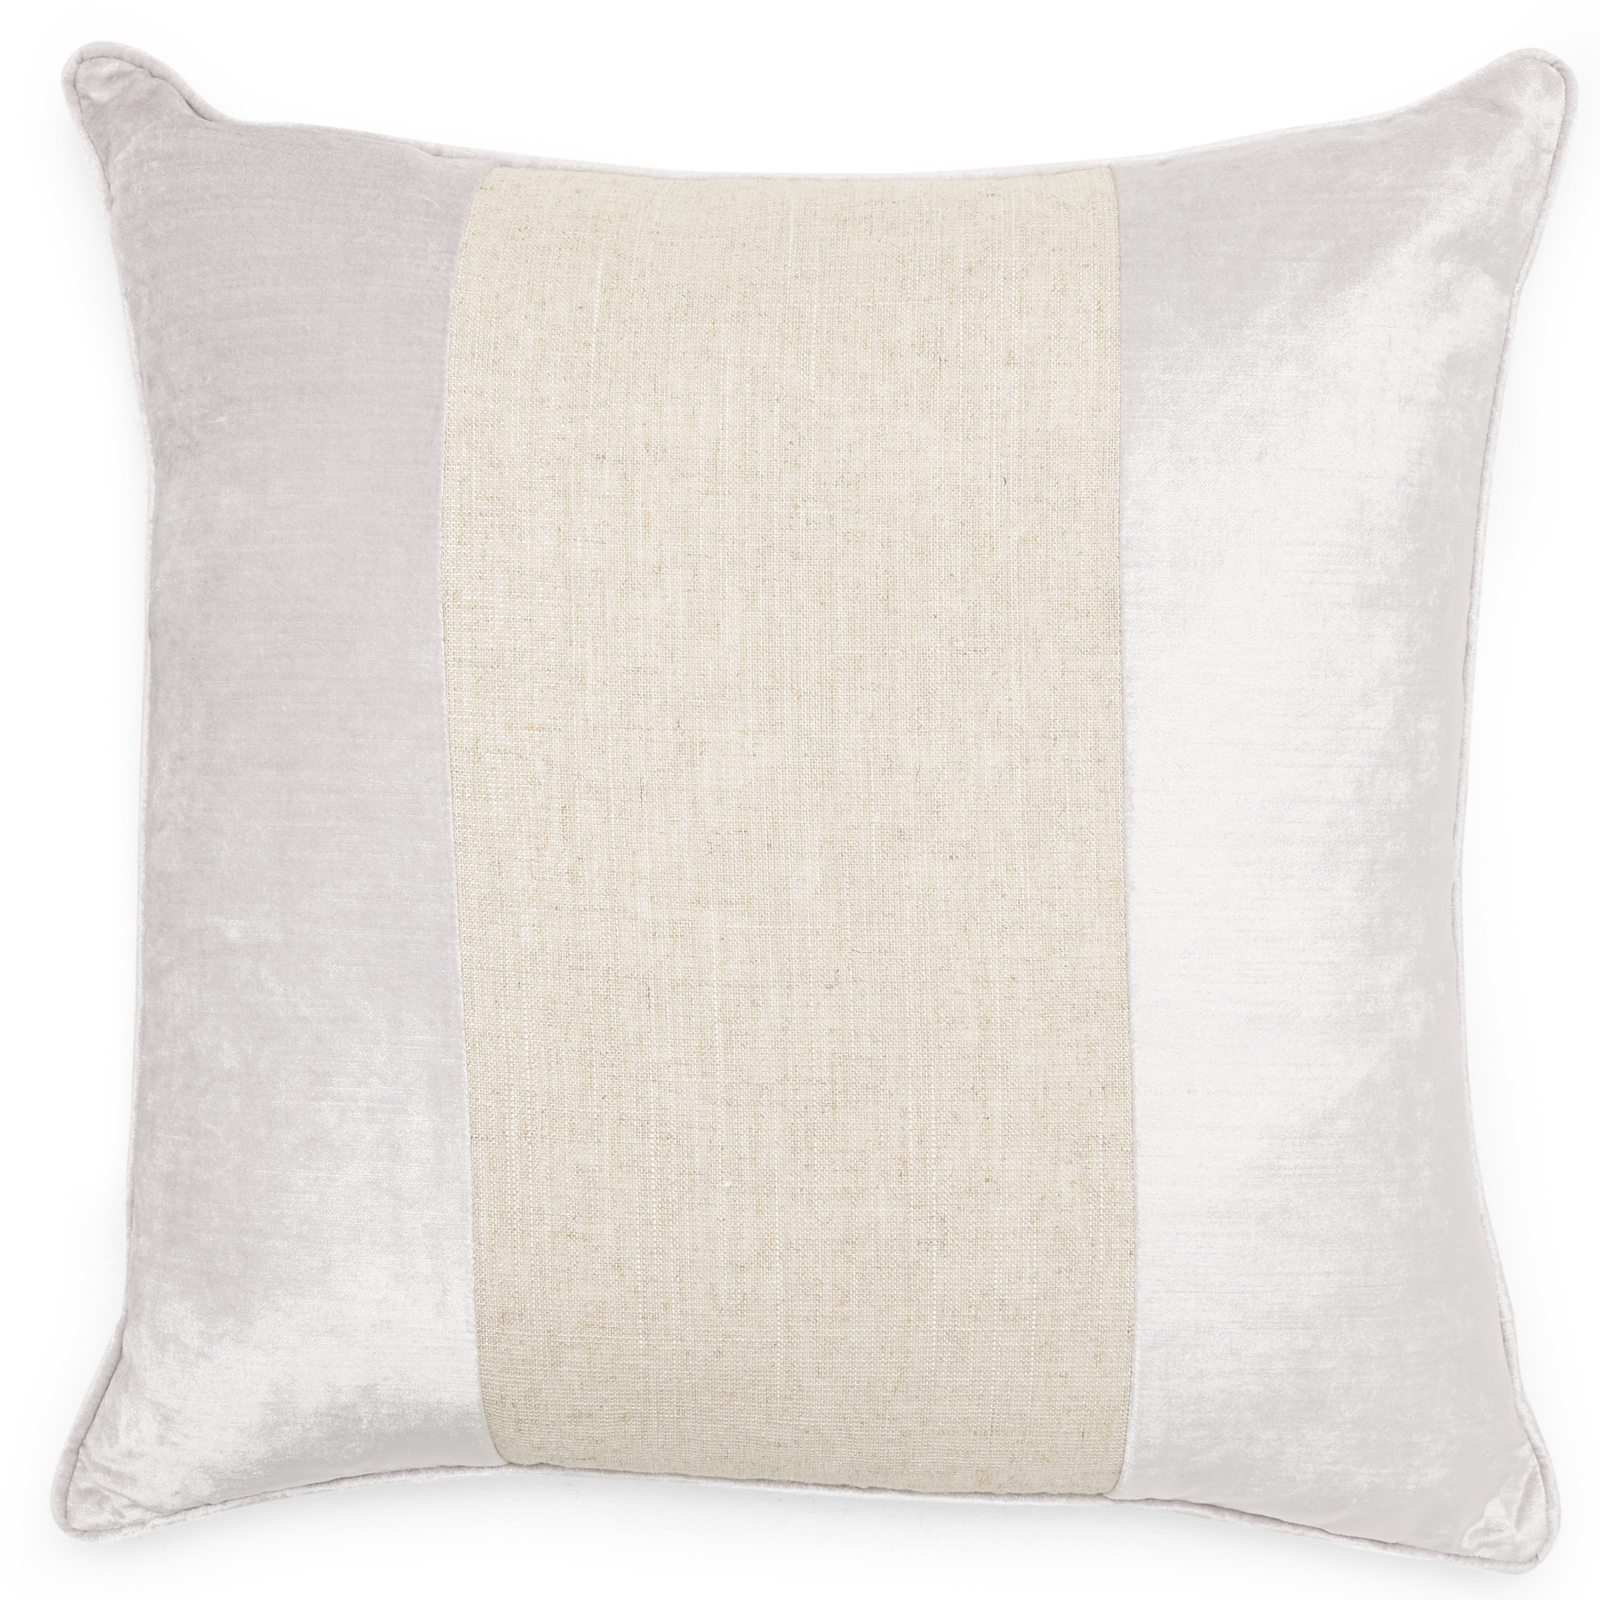 MoDRN Glam Striped Linen and Velvet Decorative Throw Pillow, 20" x 20" - image 1 of 5